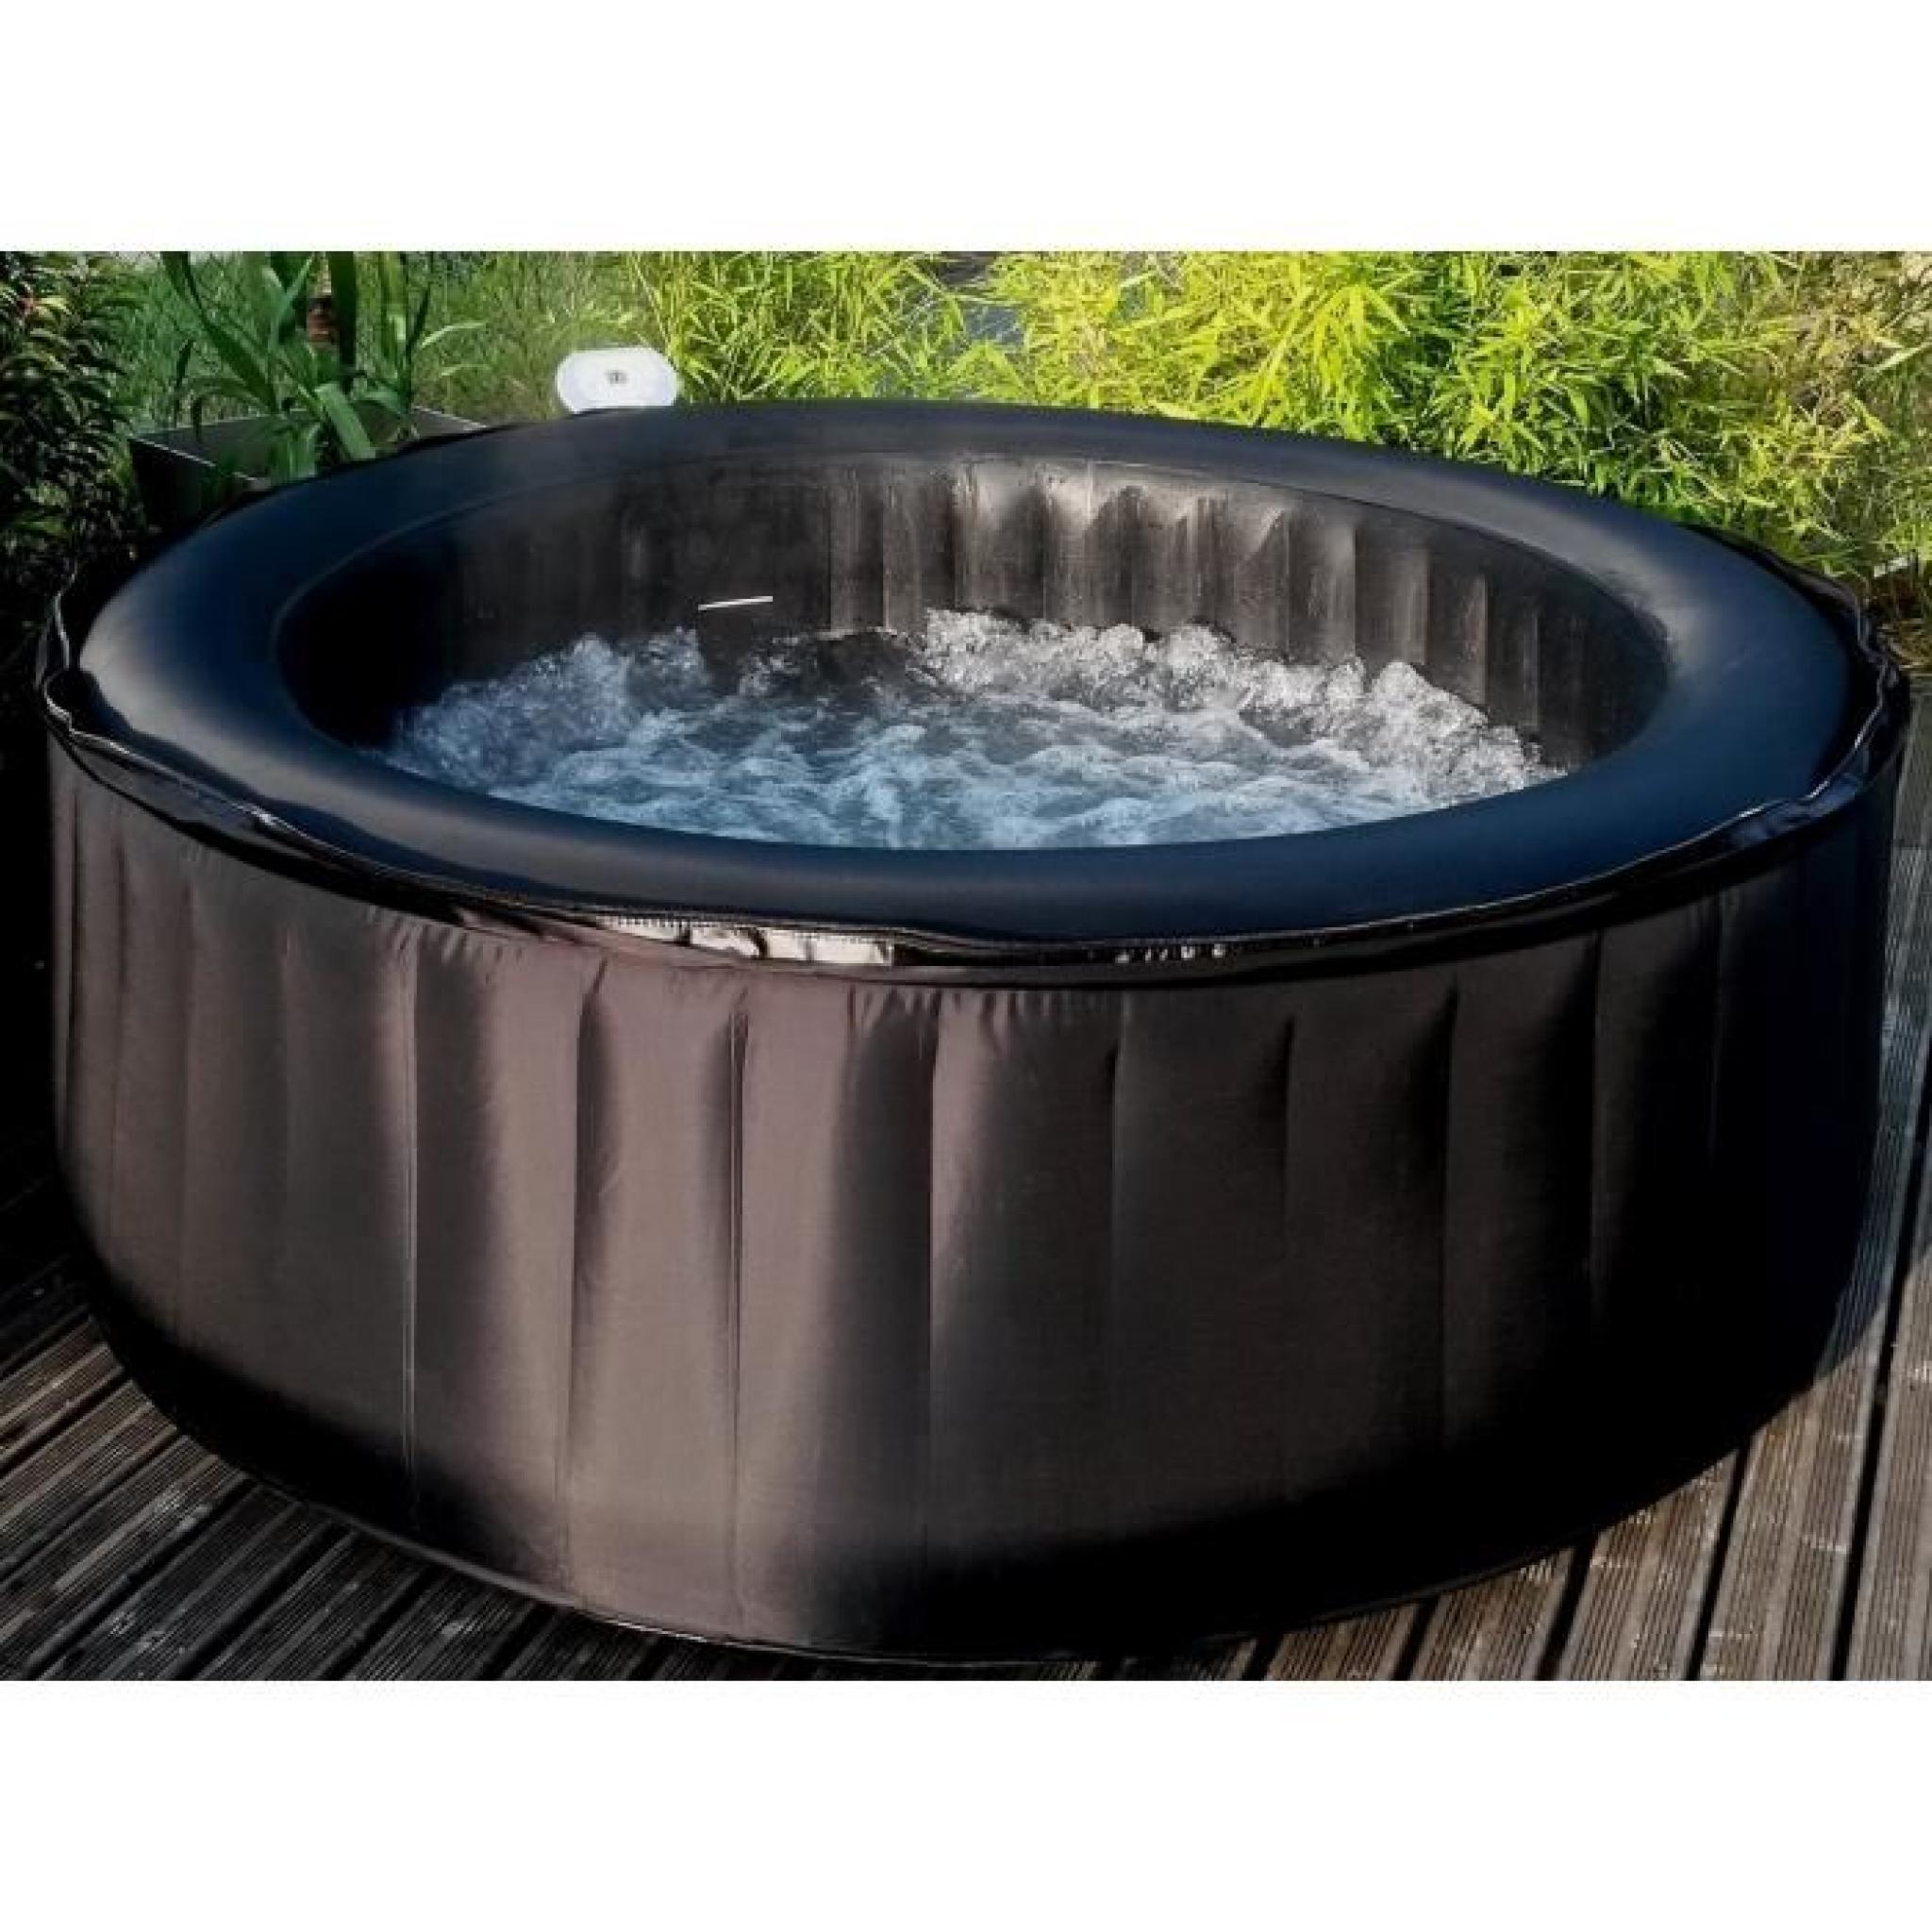 WATERHEALTH Spa gonflable rond 4 places pas cher